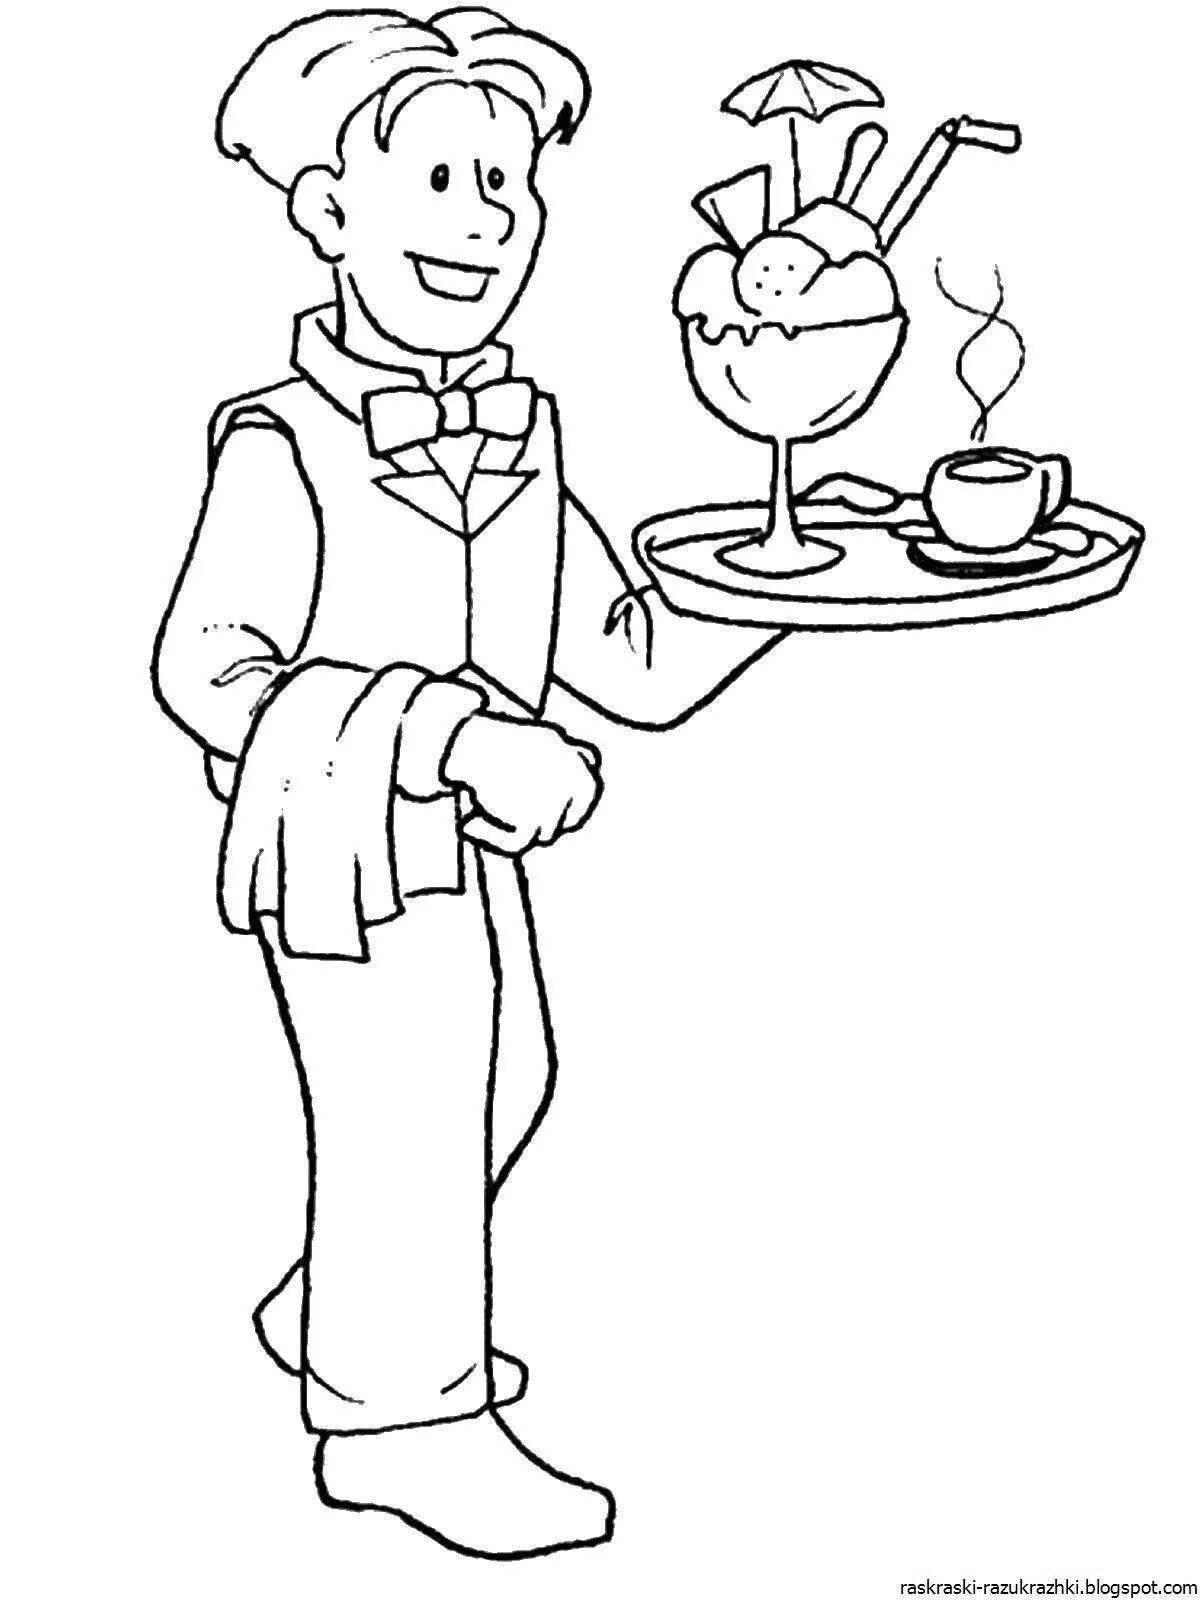 Colorful job coloring pages for travelers